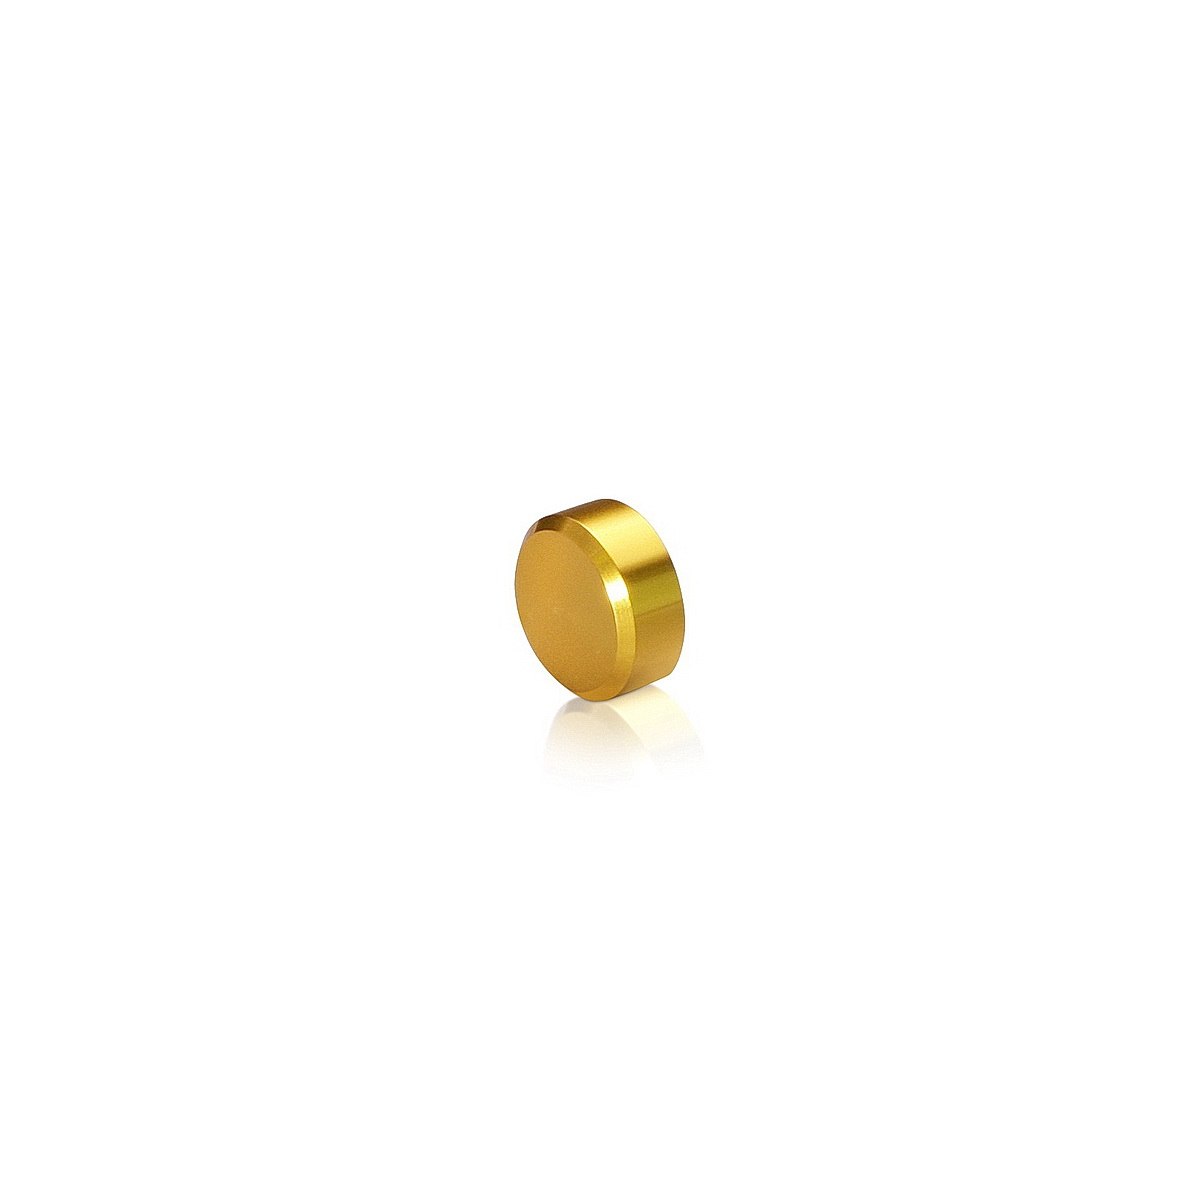 1/4-20 Threaded Caps Diameter: 5/8'', Height: 1/4'', Gold Anodized Aluminum [Required Material Hole Size: 5/16'']